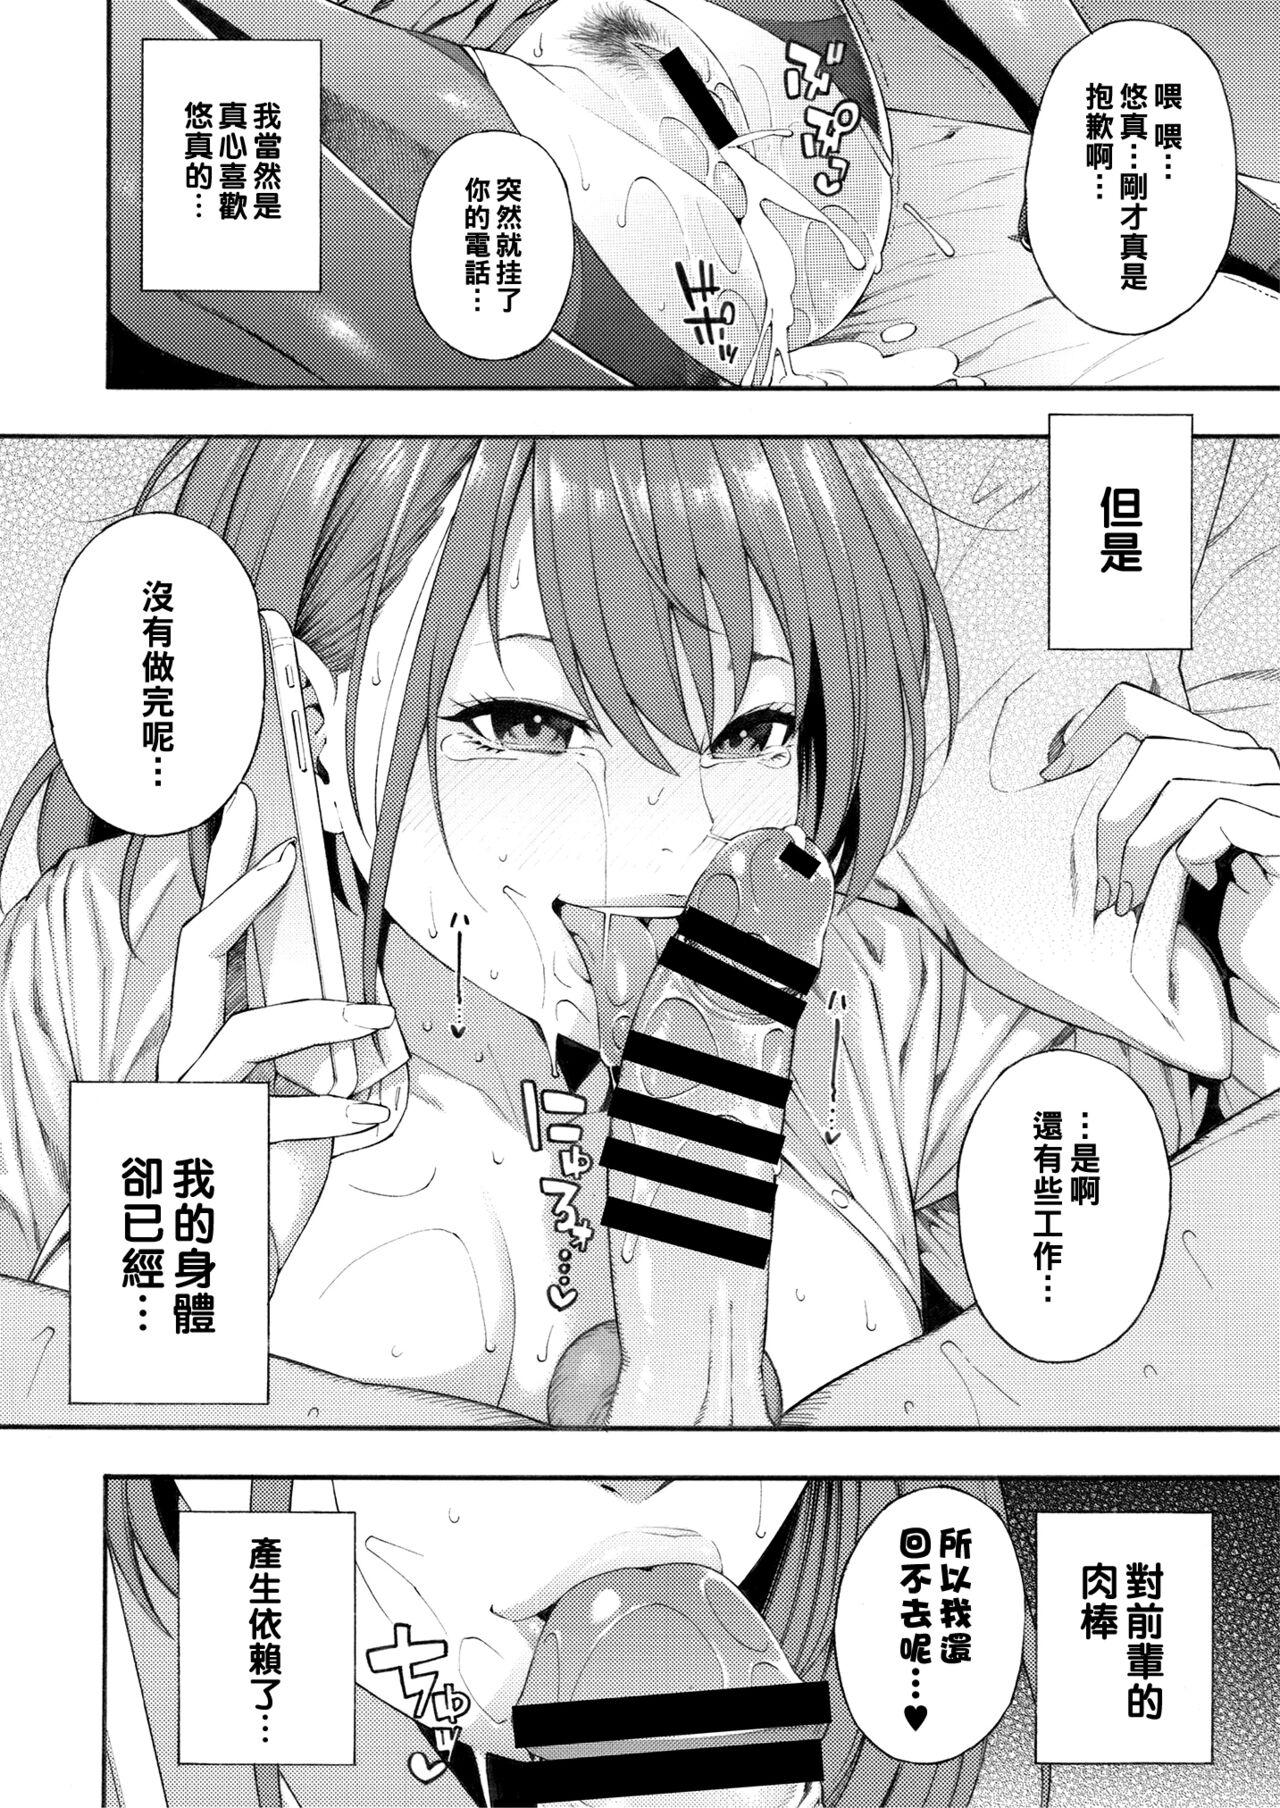 Licking 依存（Chinese） Best Blow Jobs Ever - Page 16